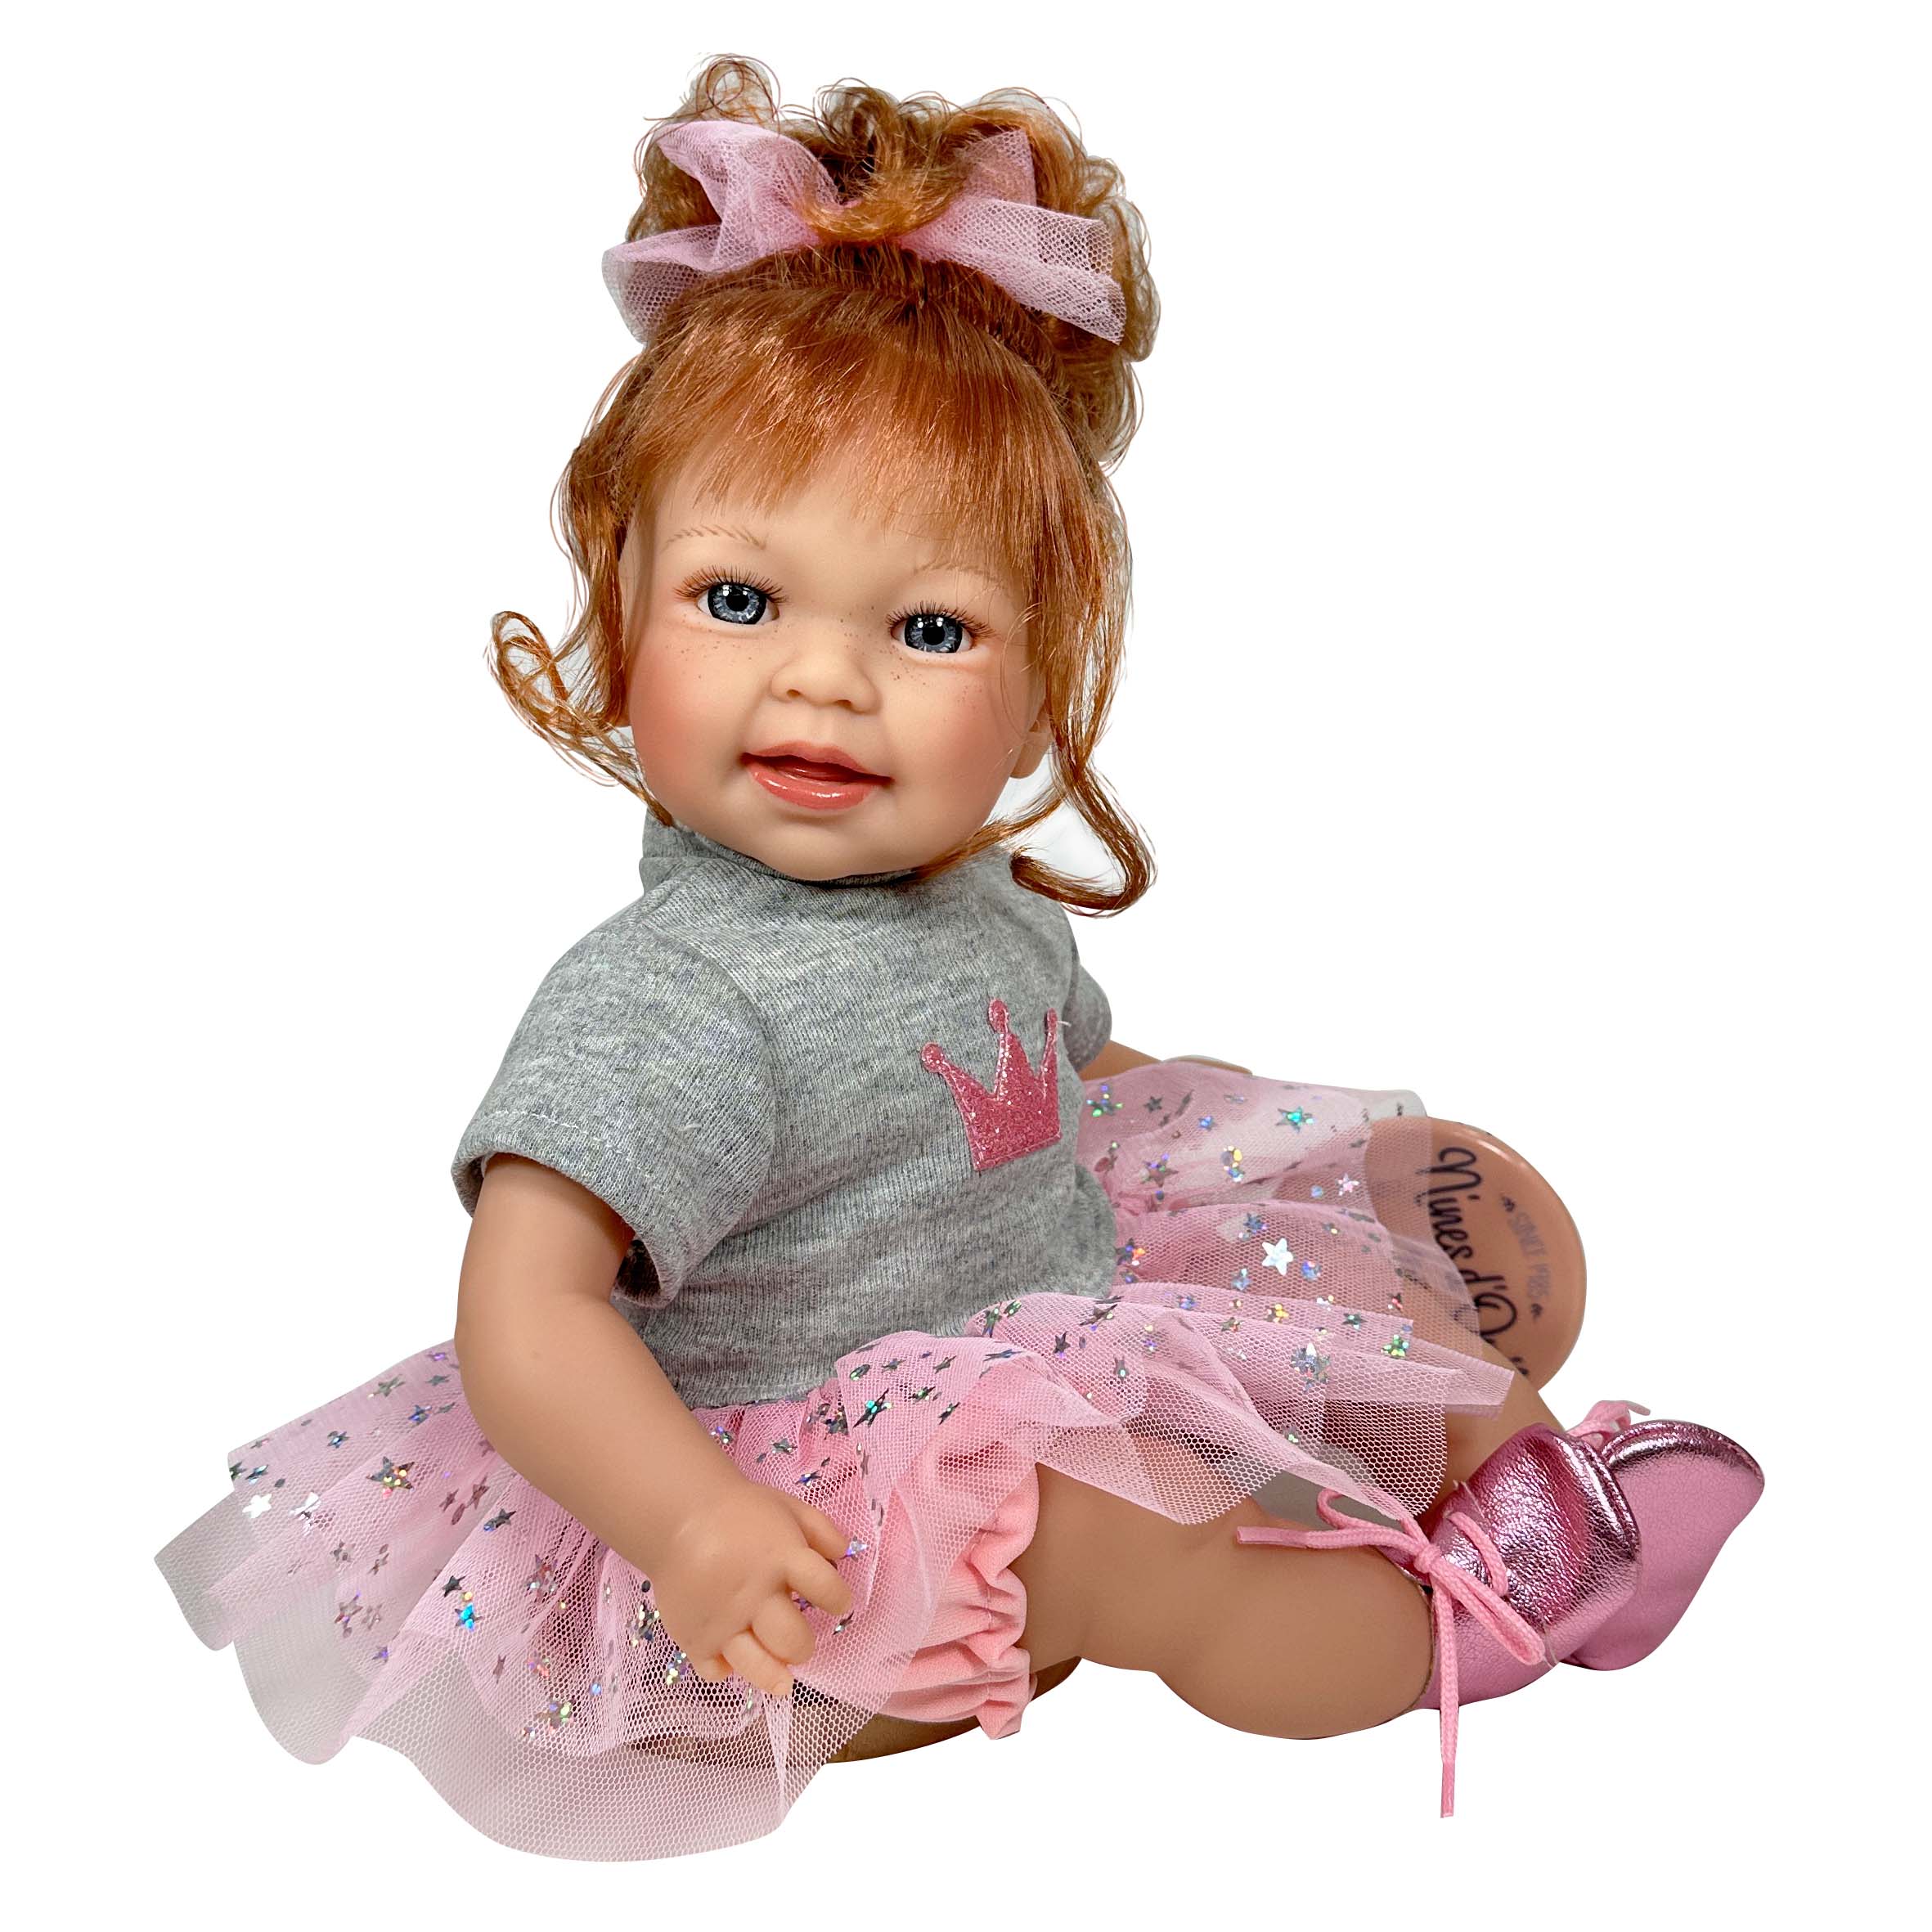 Handcrafted Little Susi Doll (3970) by Nines D&